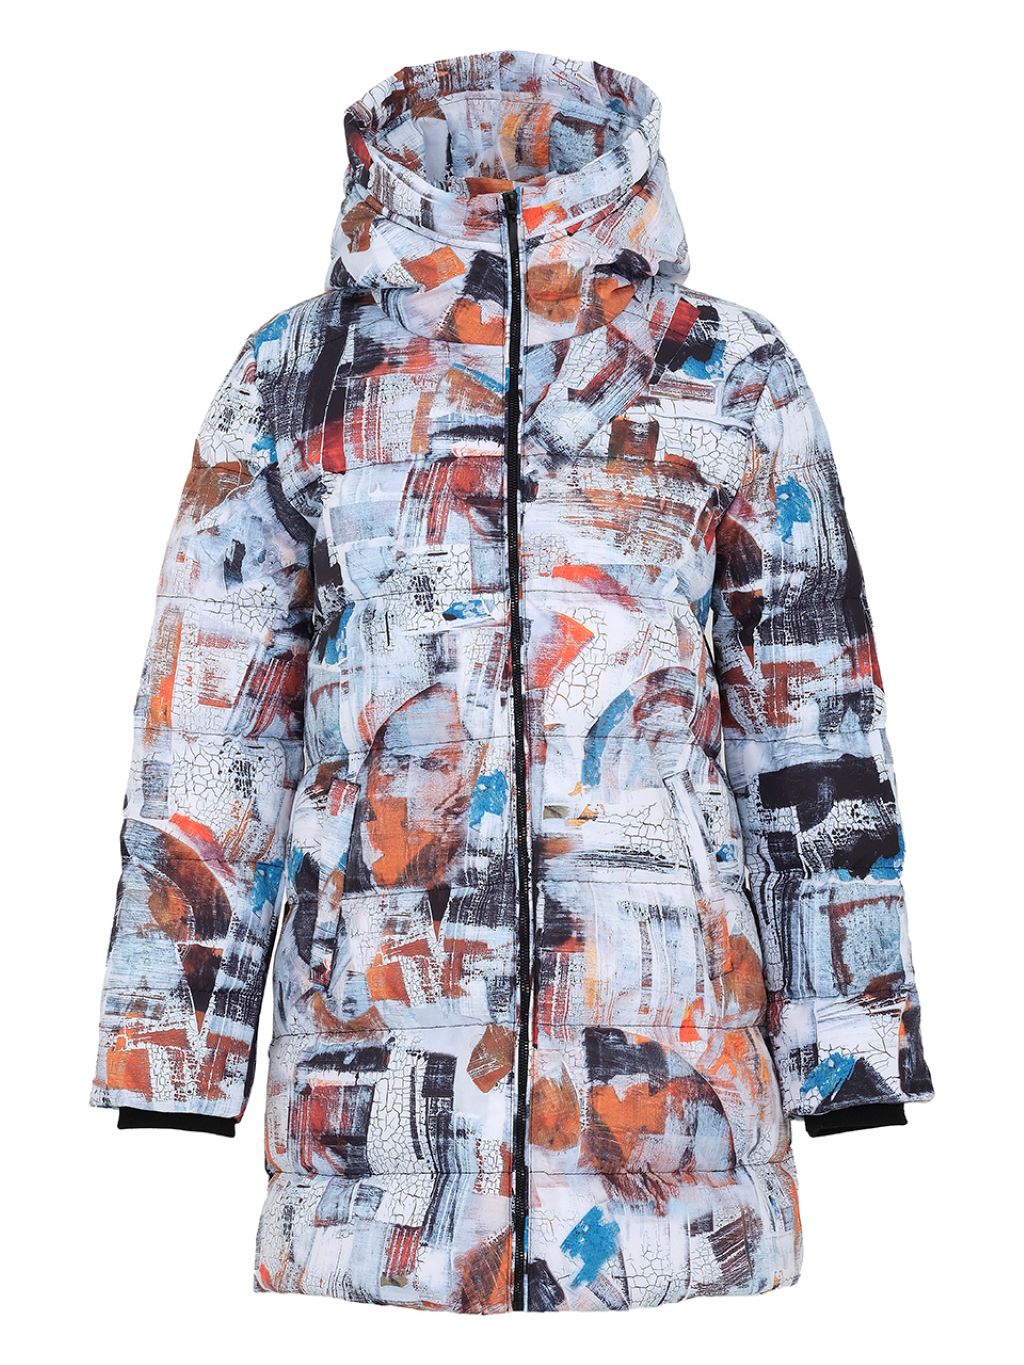 "Kamiros" Printed Puffer Coat by Dolcezza